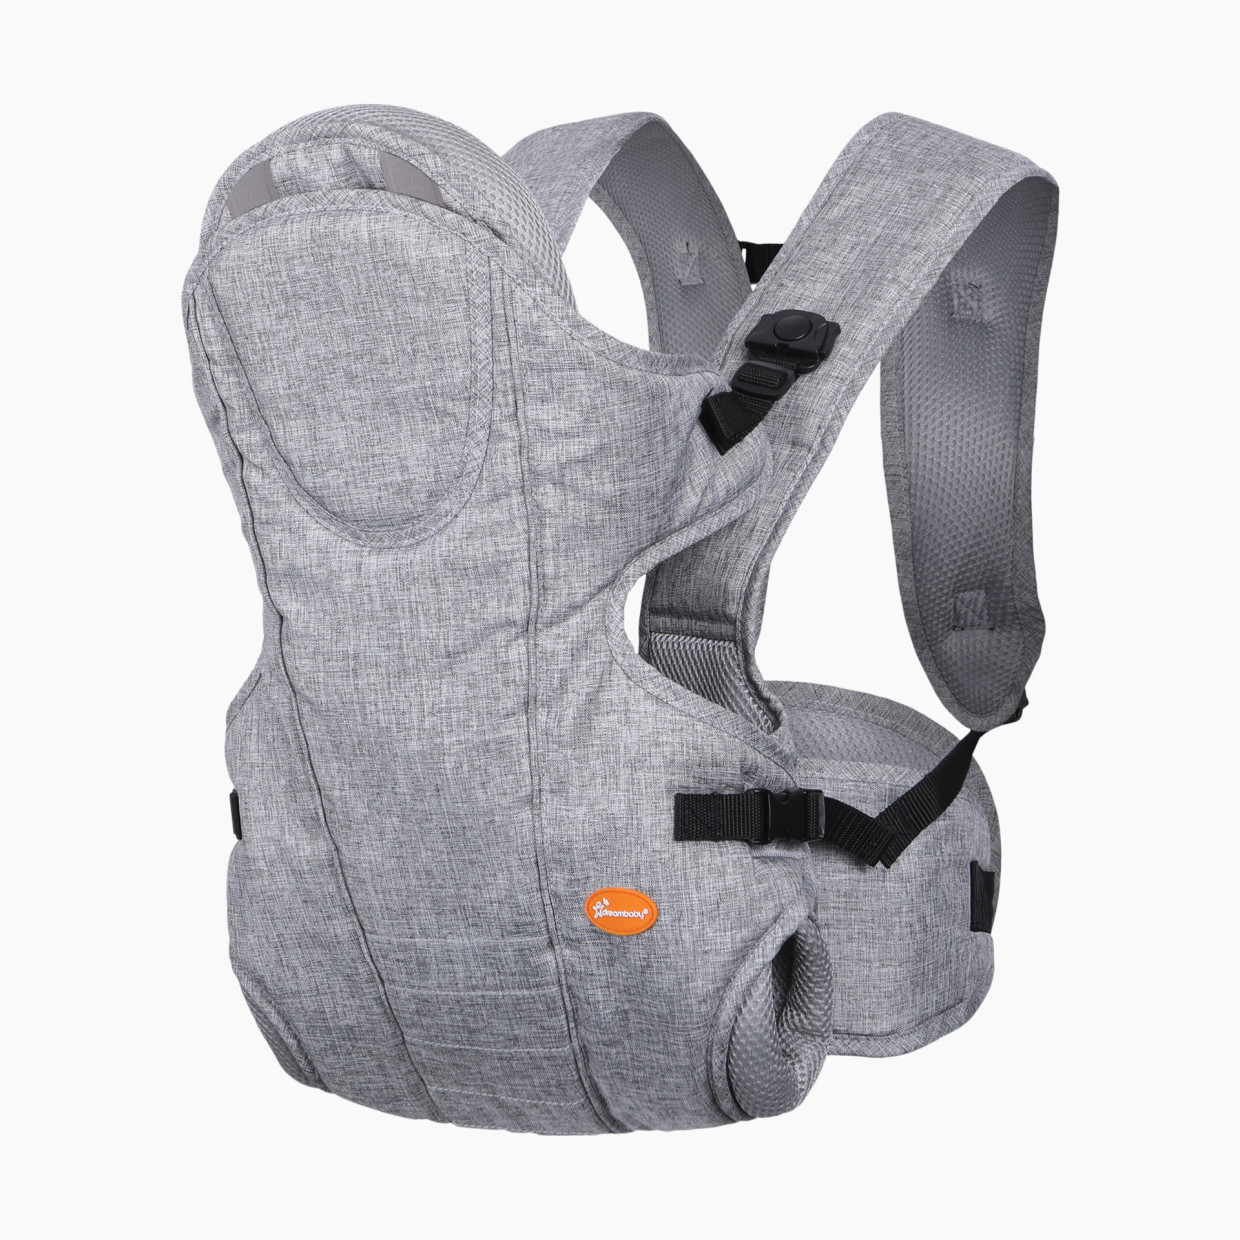 Dreambaby Oxford Carrier.